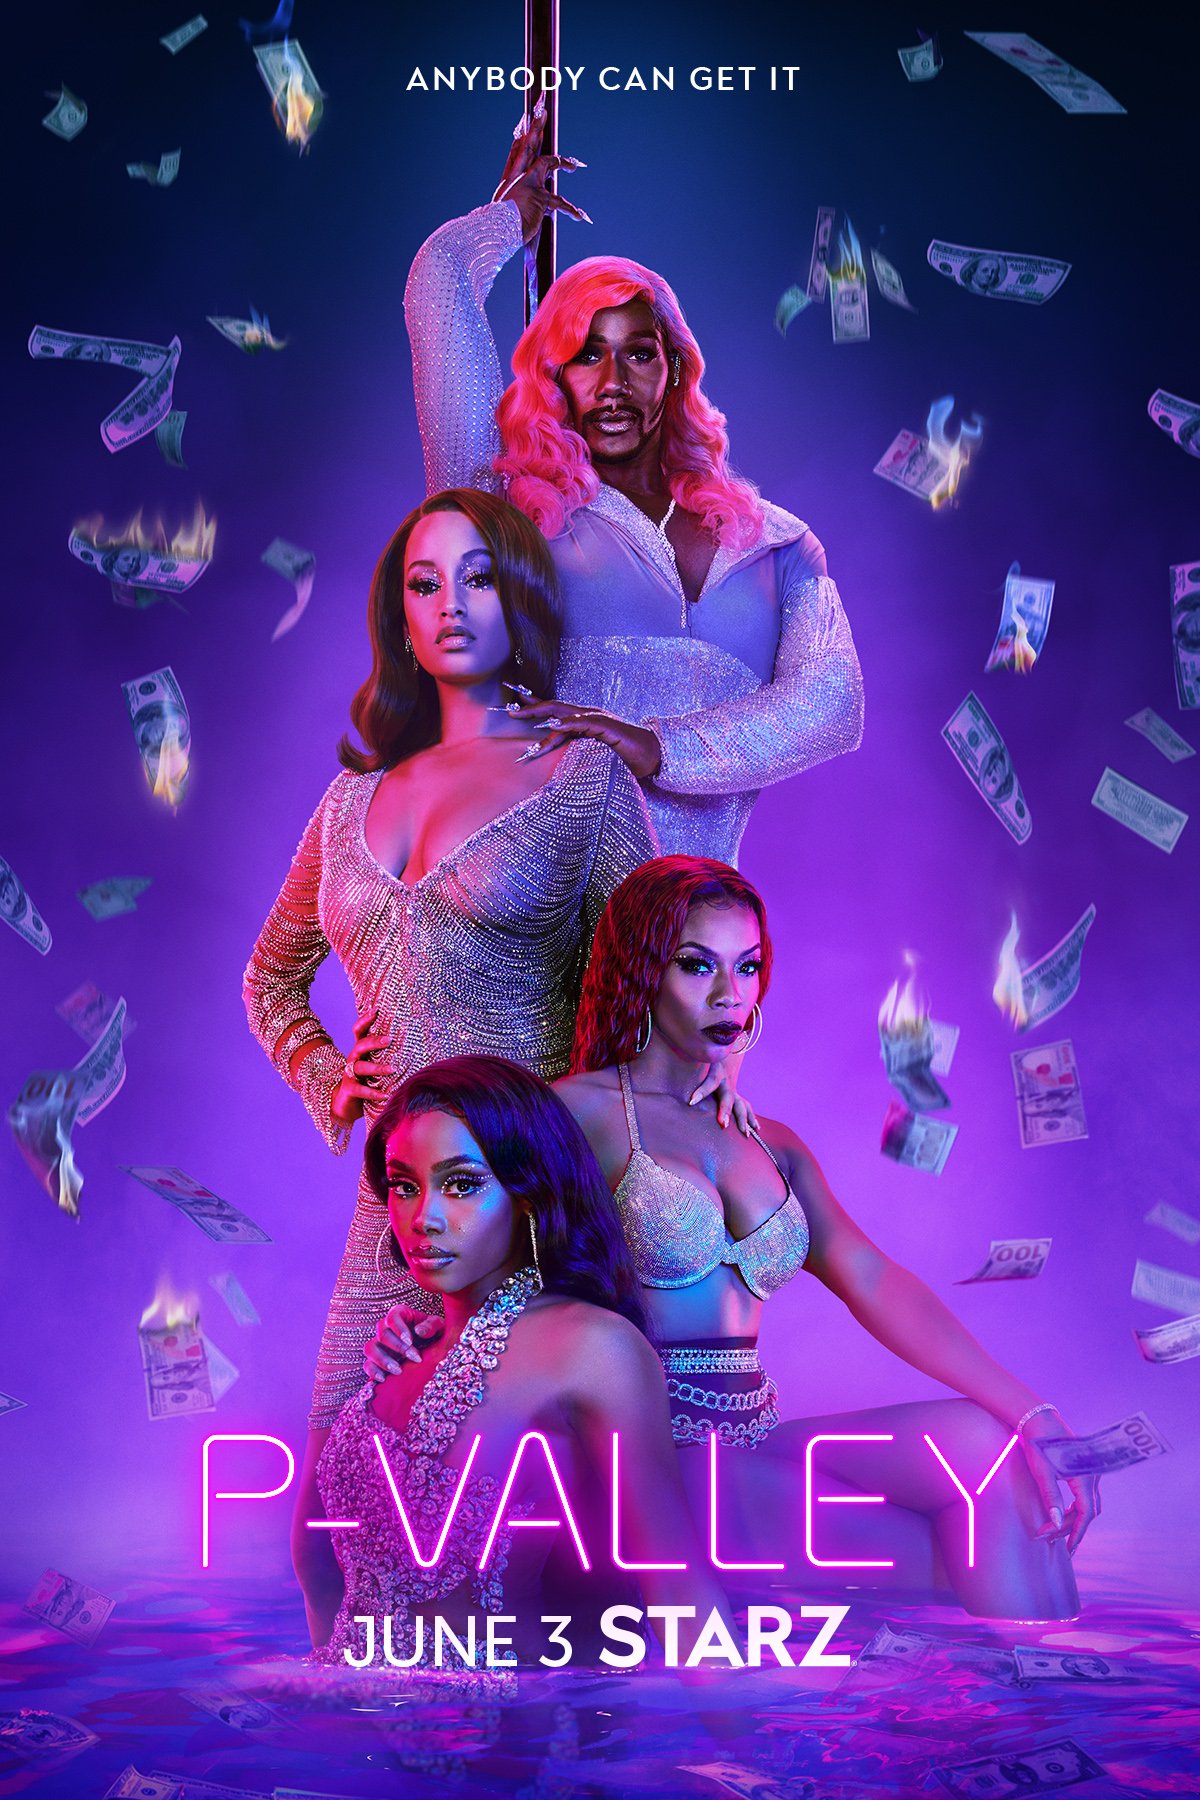  P-Valley Season 2 TV Series 2022, Official Trailer, Release Date